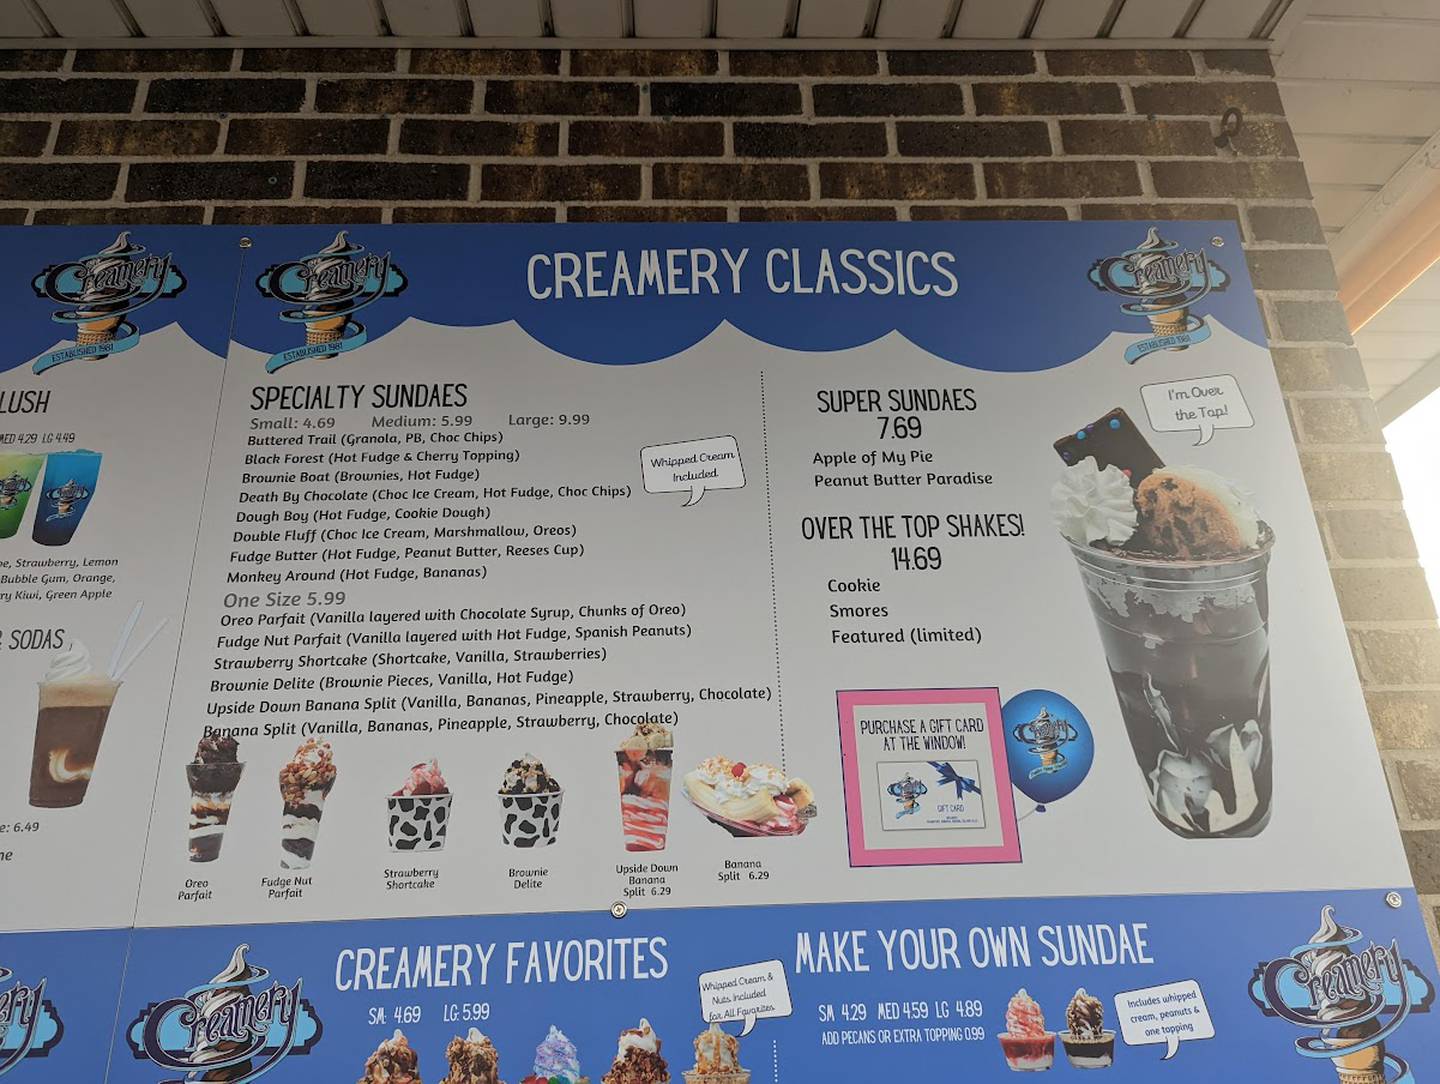 The Minooka Creamery is a longtime favorite ice cream venue that often attracts long lines. The wait is typically minimal and the ice cream is worth the wait.